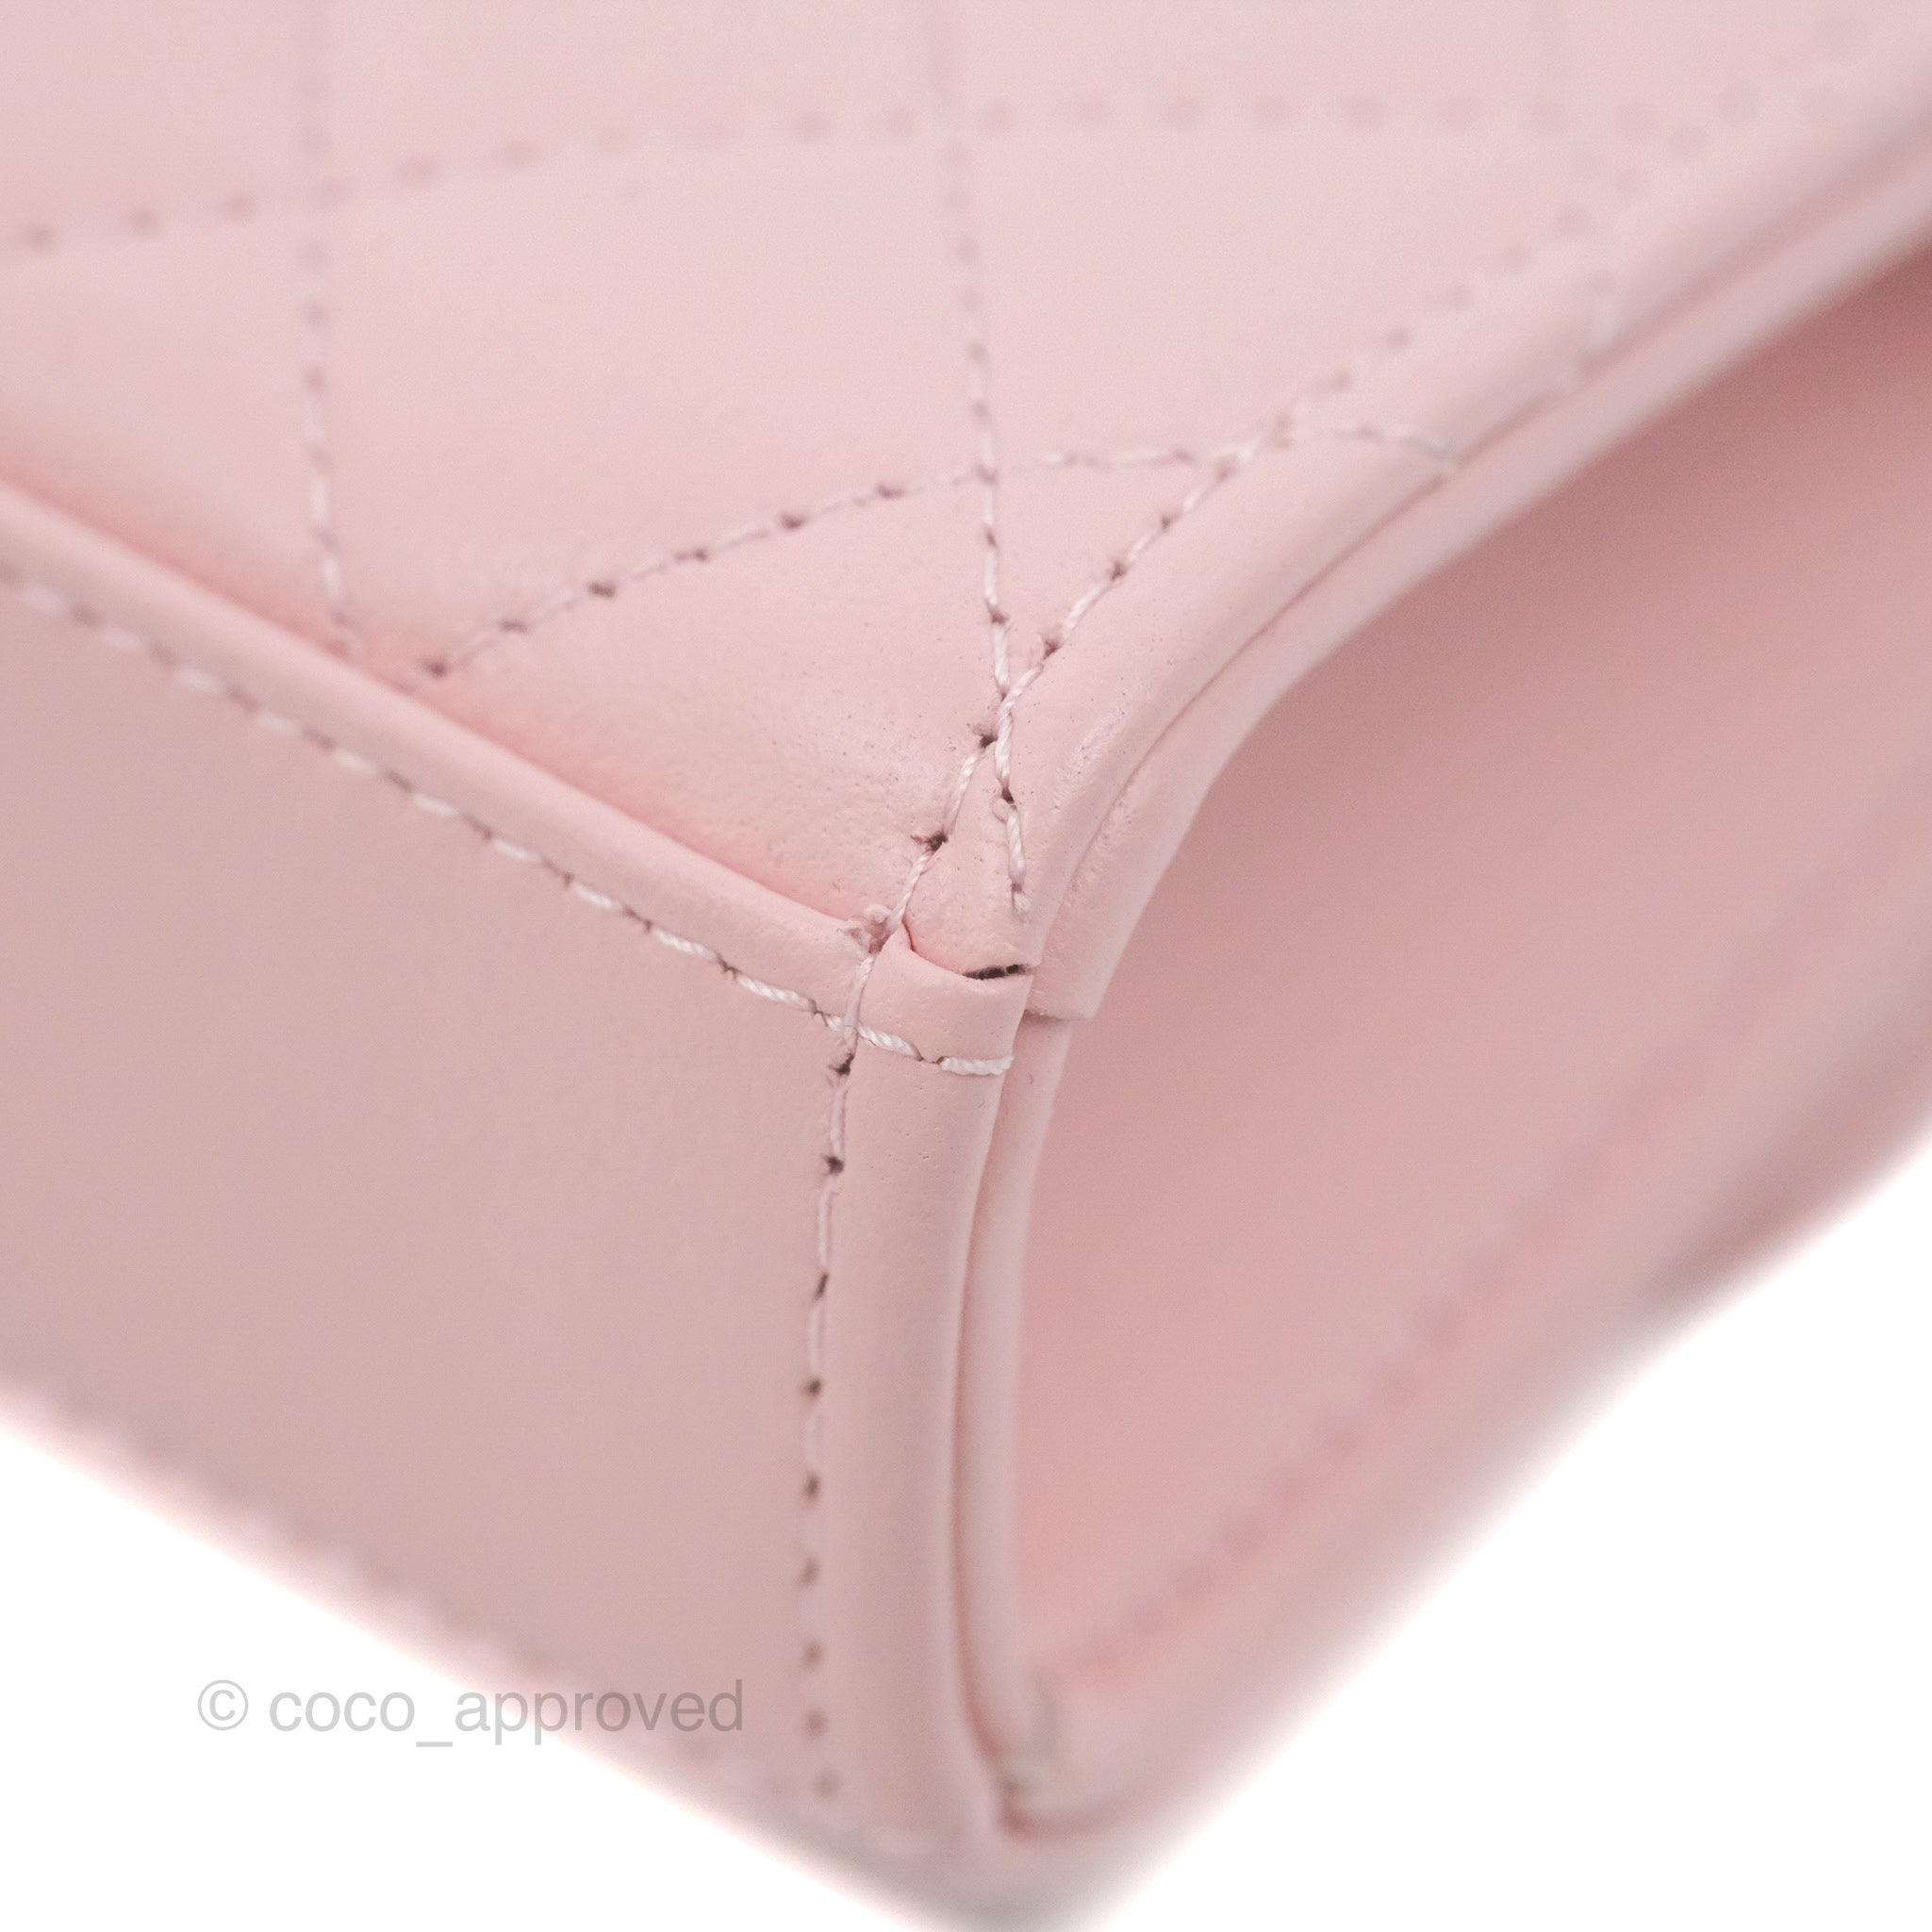 Pink Quilted Lambskin Leather Small Top Handle Classic Single